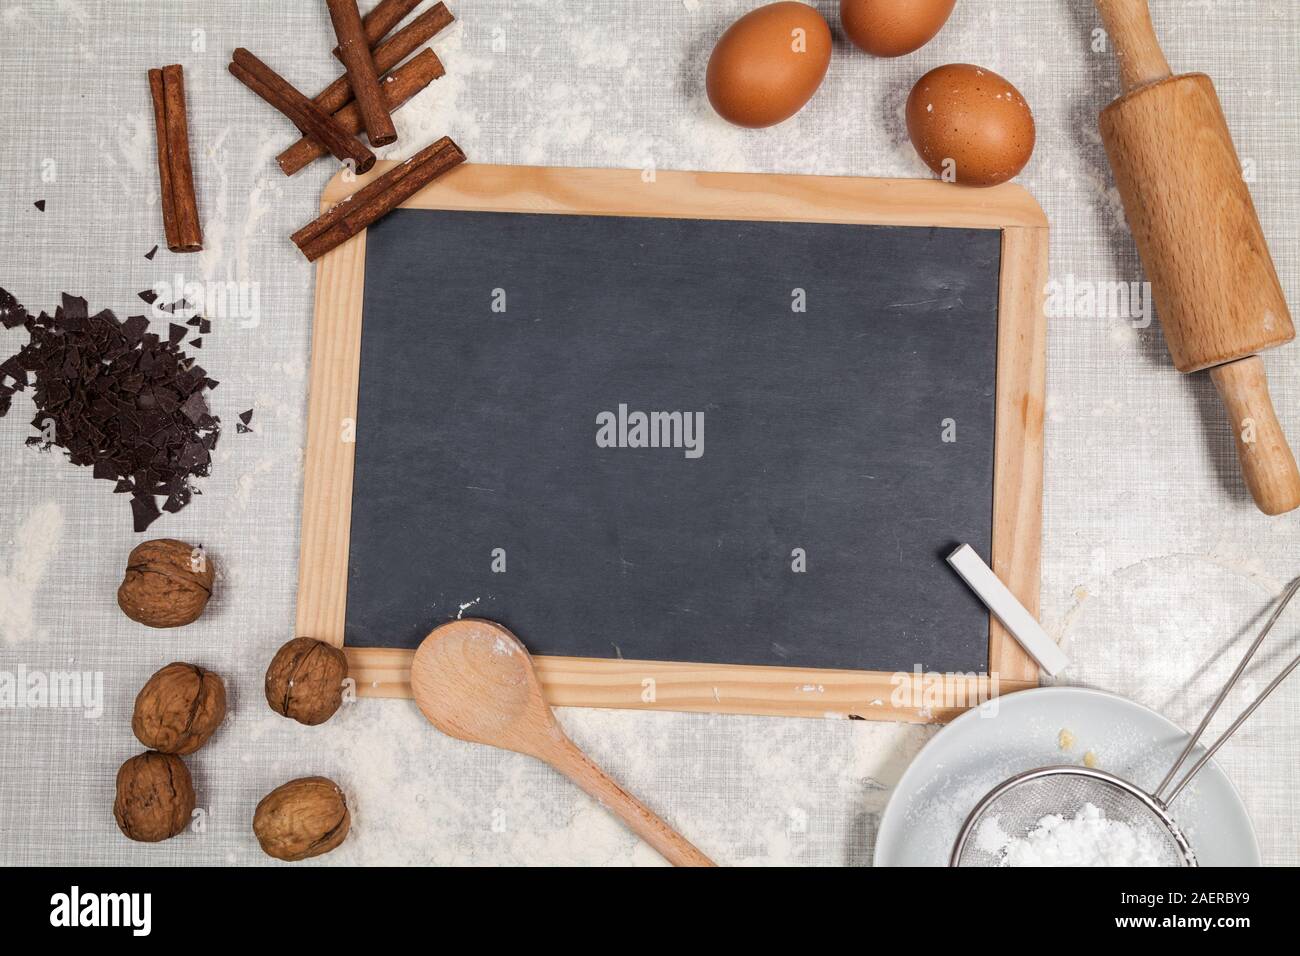 Empty blackboard and cookie baking table Stock Photo